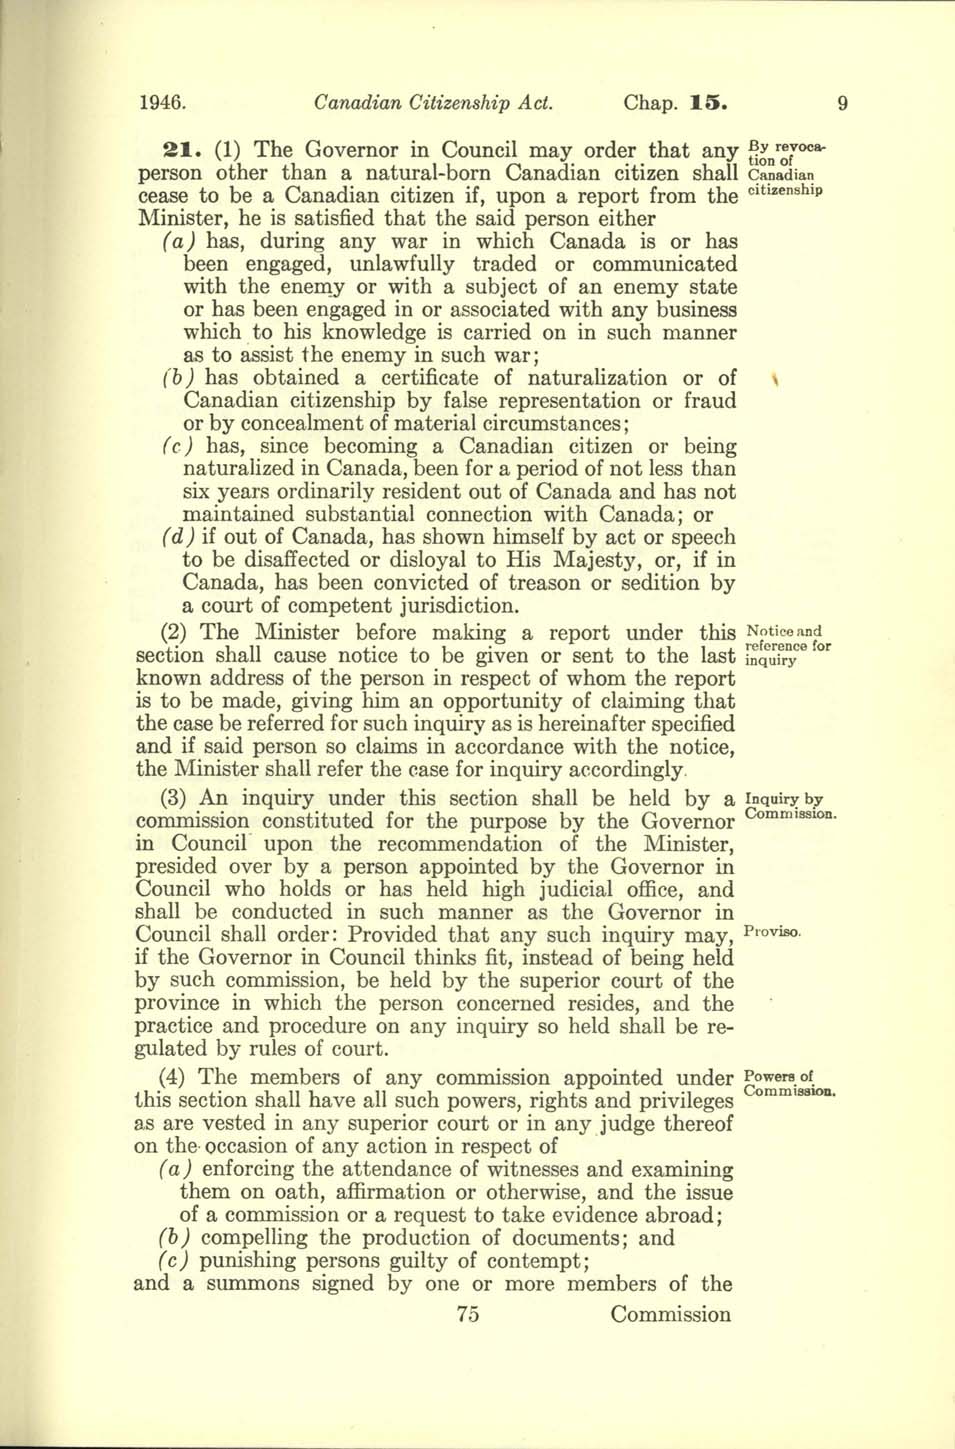 Chap 15 Page 75 Canadian Citizenship Act, 1947